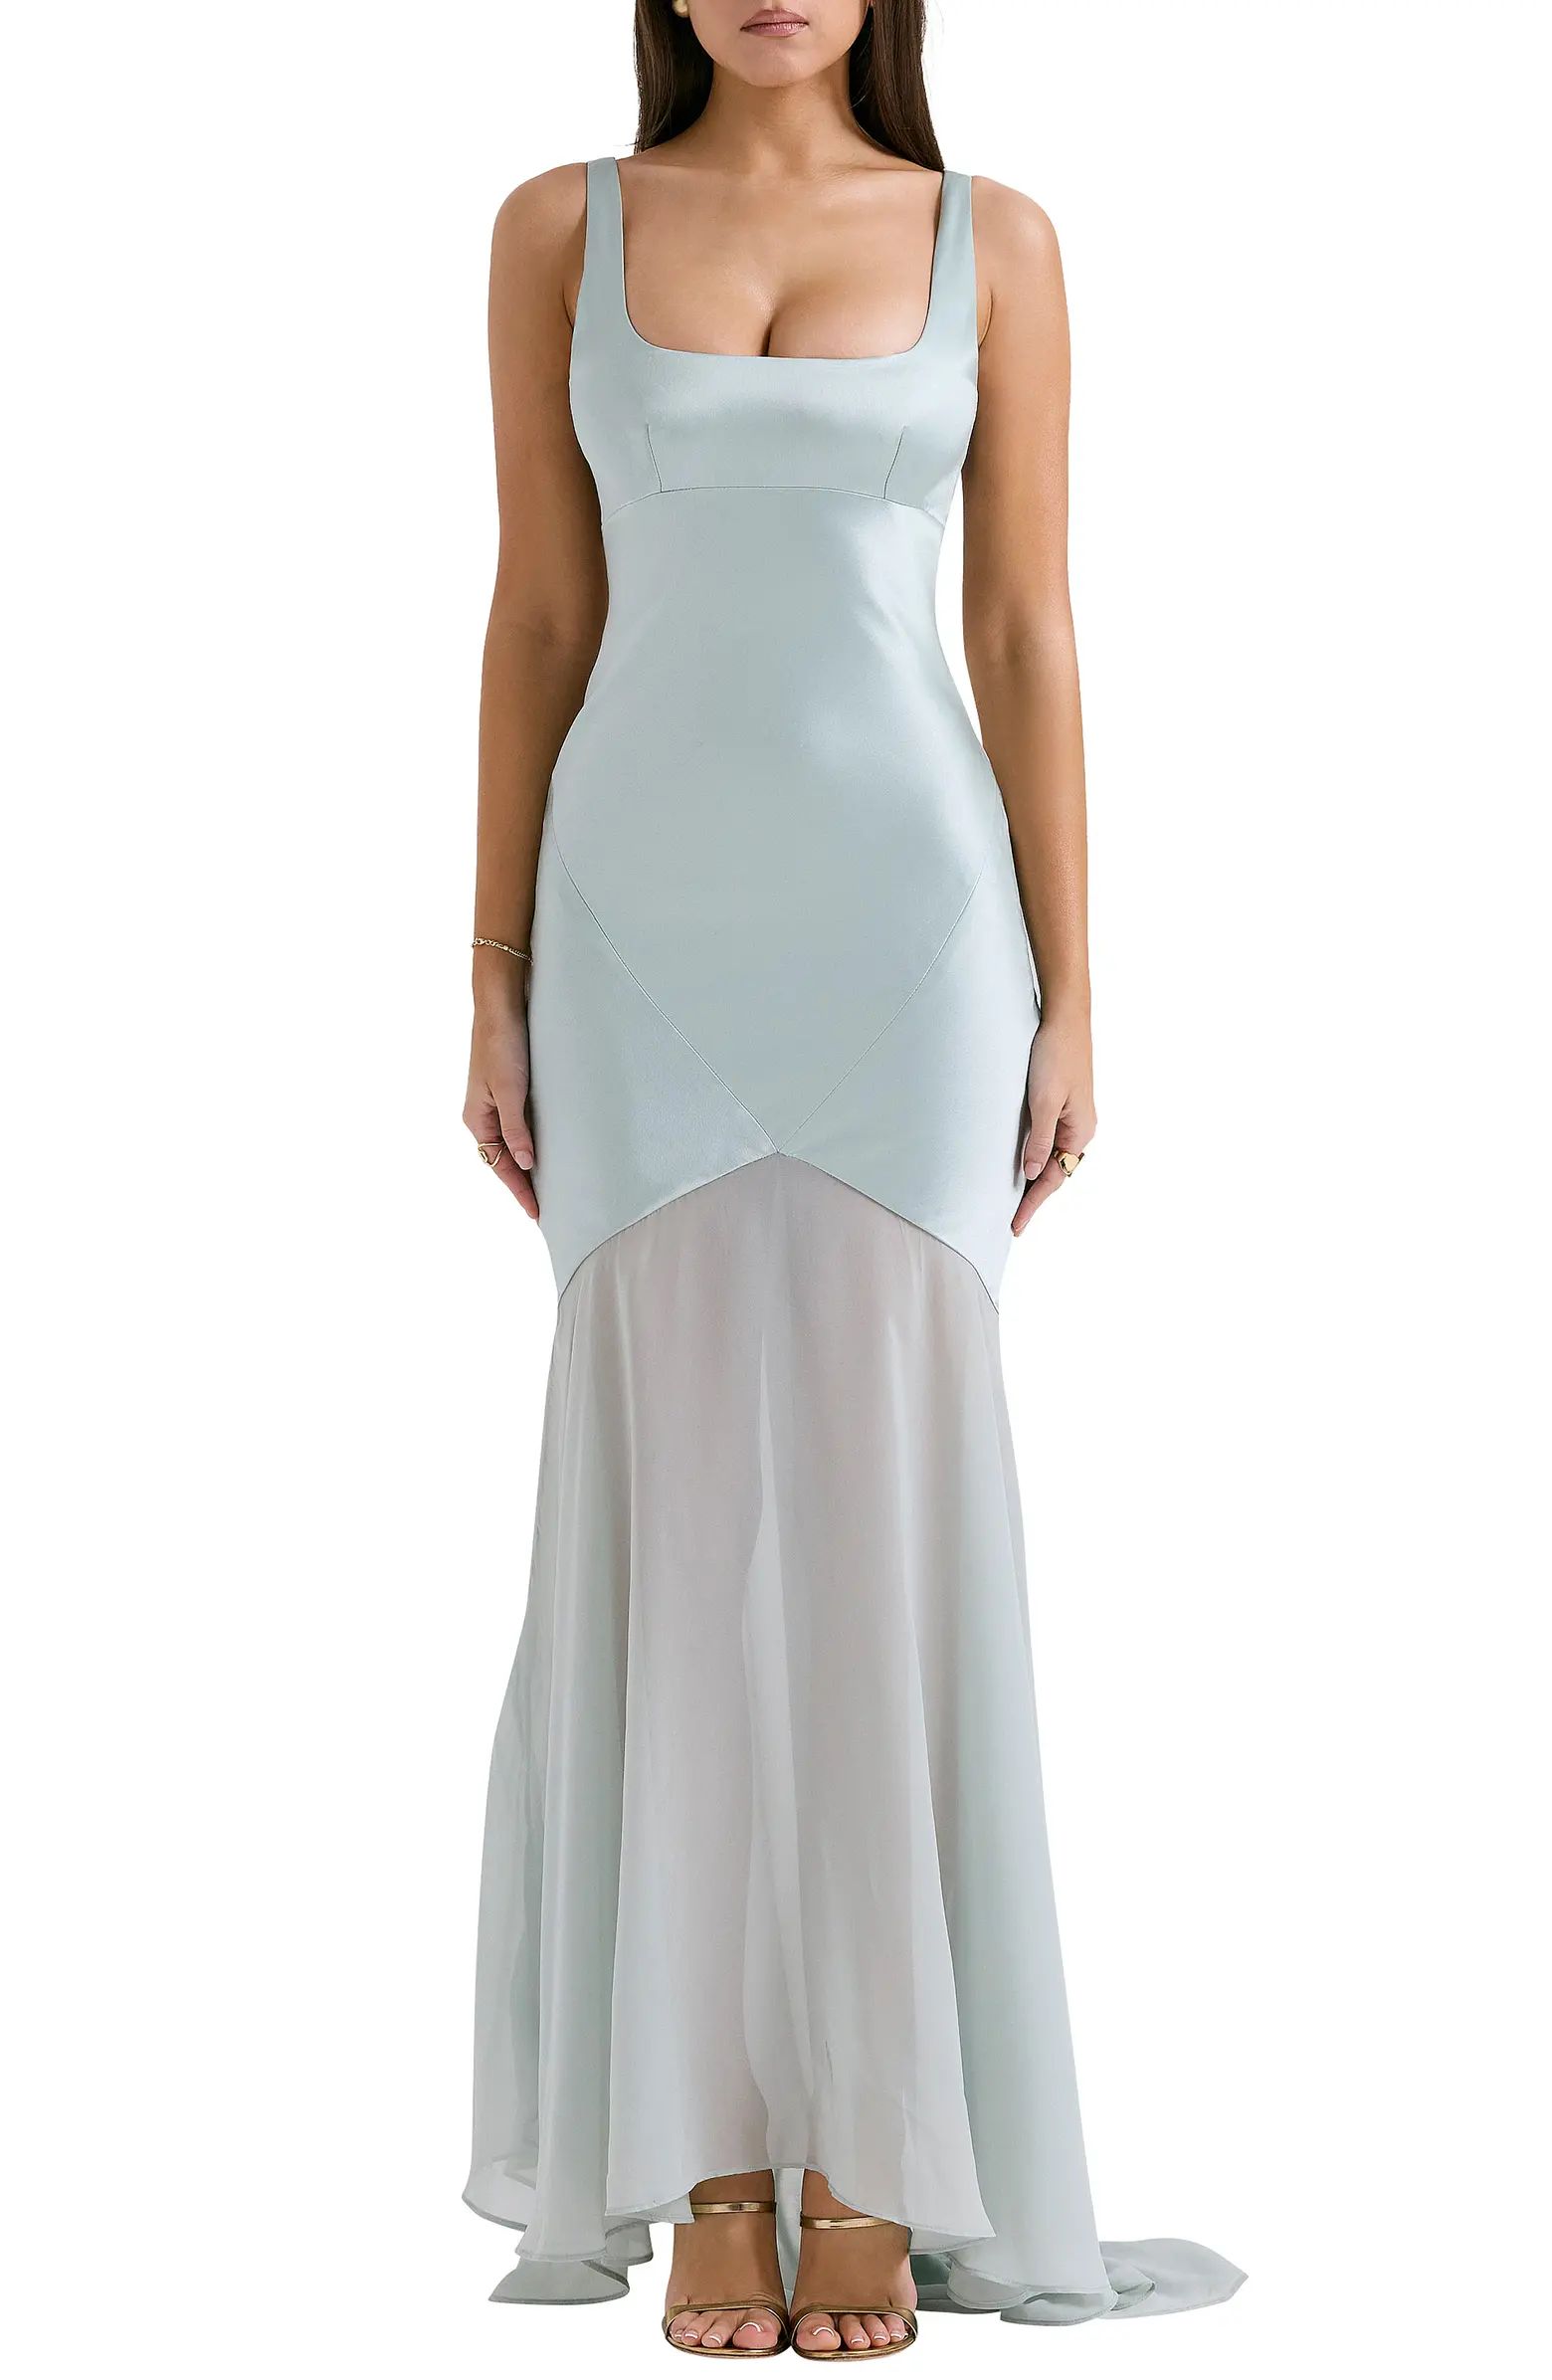 HOUSE OF CB Vittoria Paneled Satin & Chiffon Gown | Nordstrom | Nordstrom